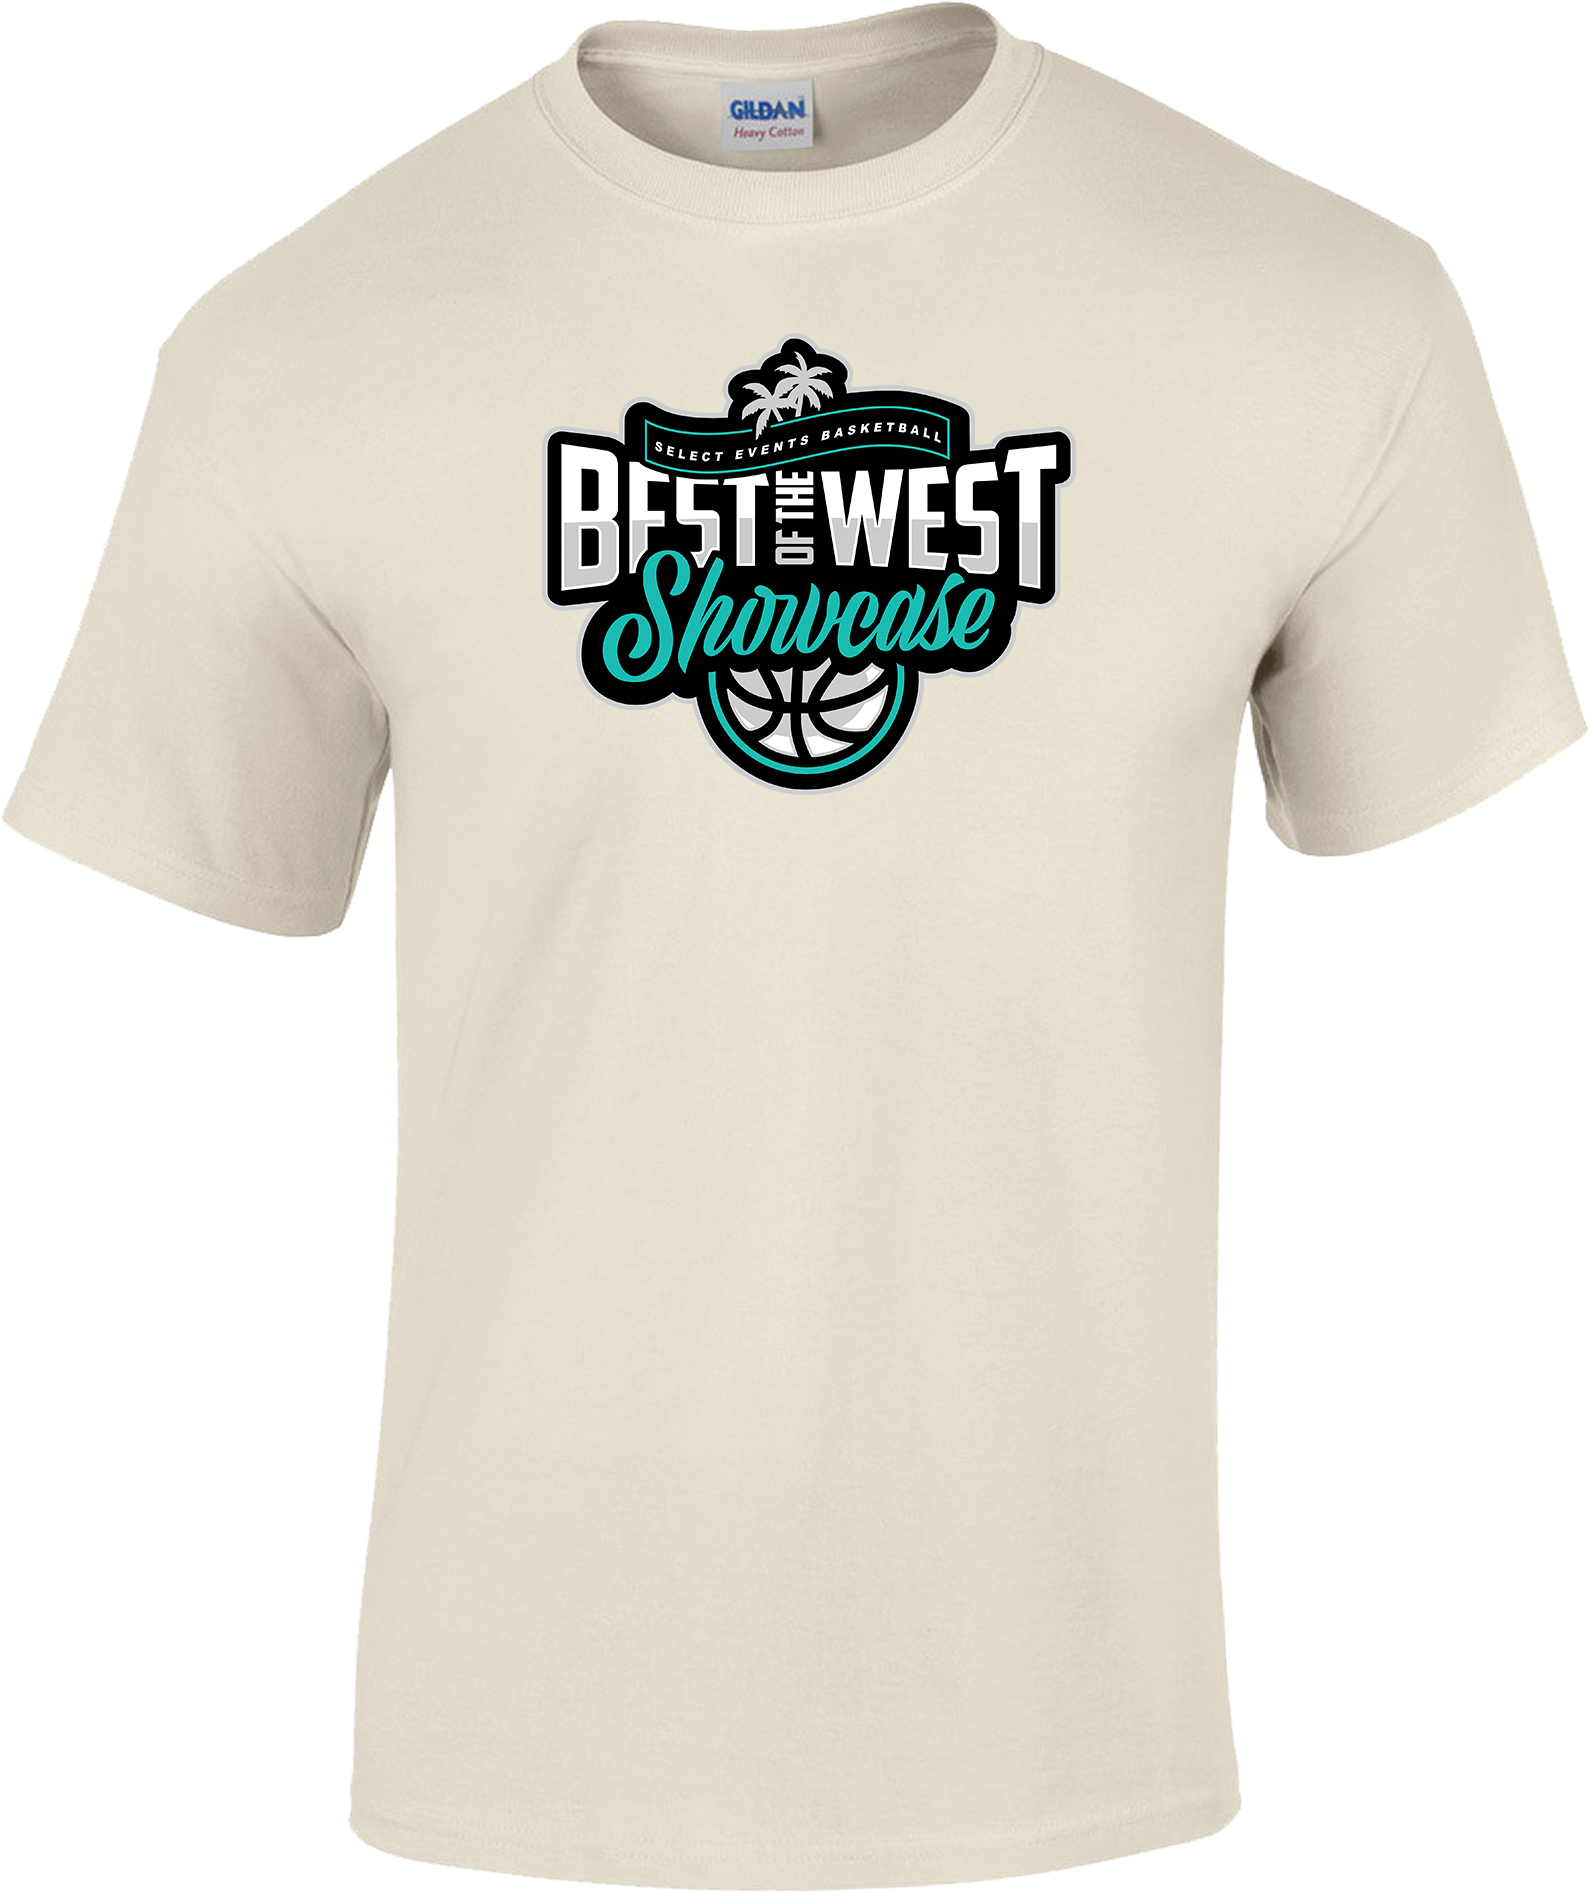 SHORT SLEEVES - 2023 Best Of The West Showcase